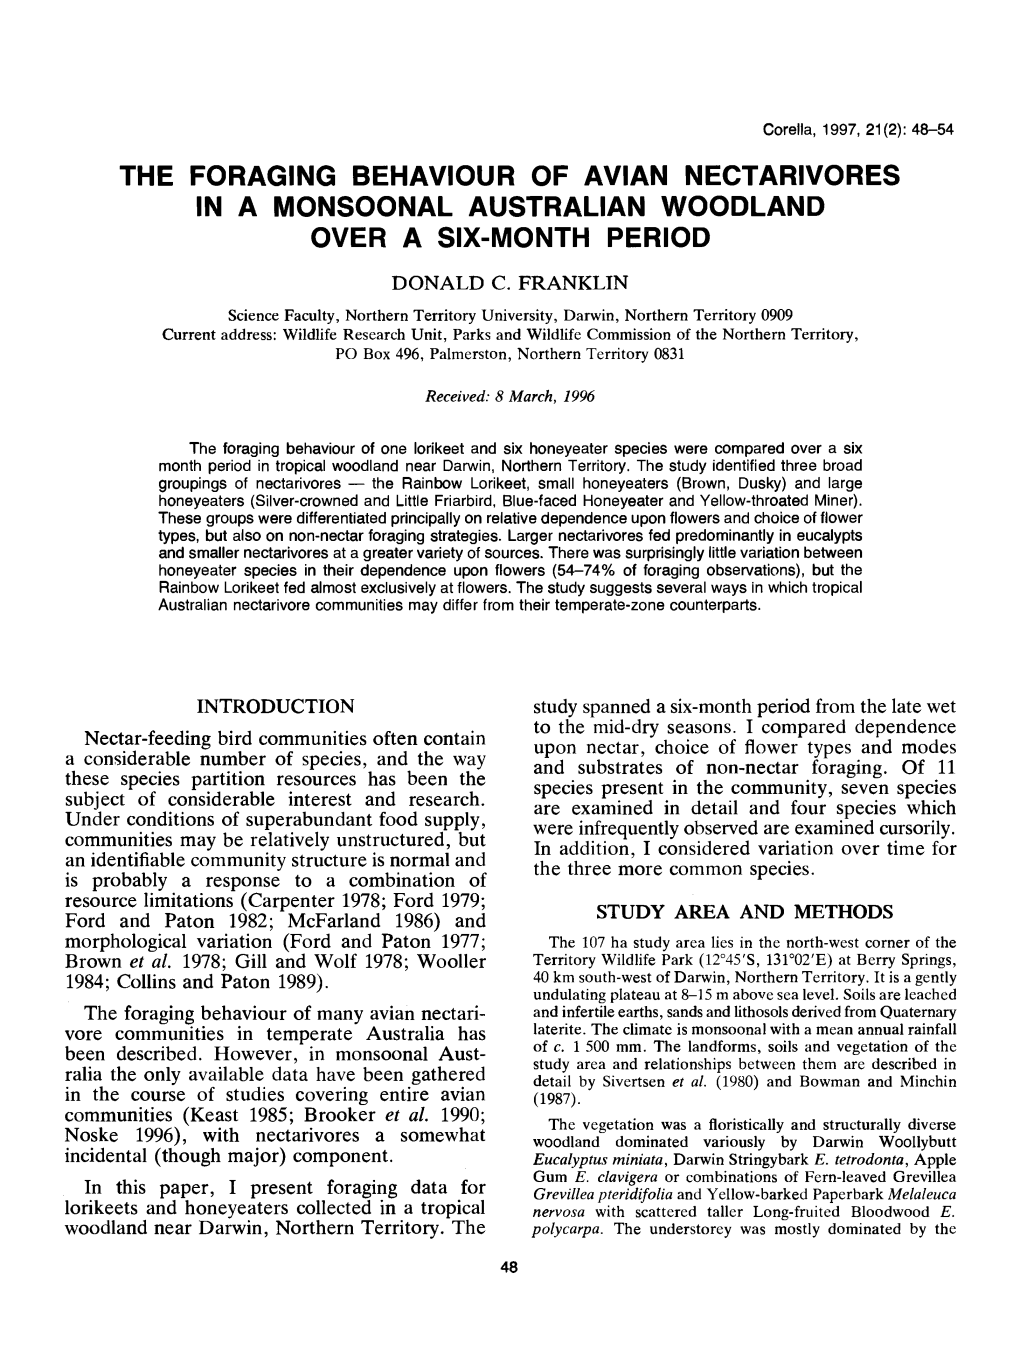 The Foraging Behaviour of Avian Nectarivores in a Monsoonal Australian Woodland Over a Six-Month Period